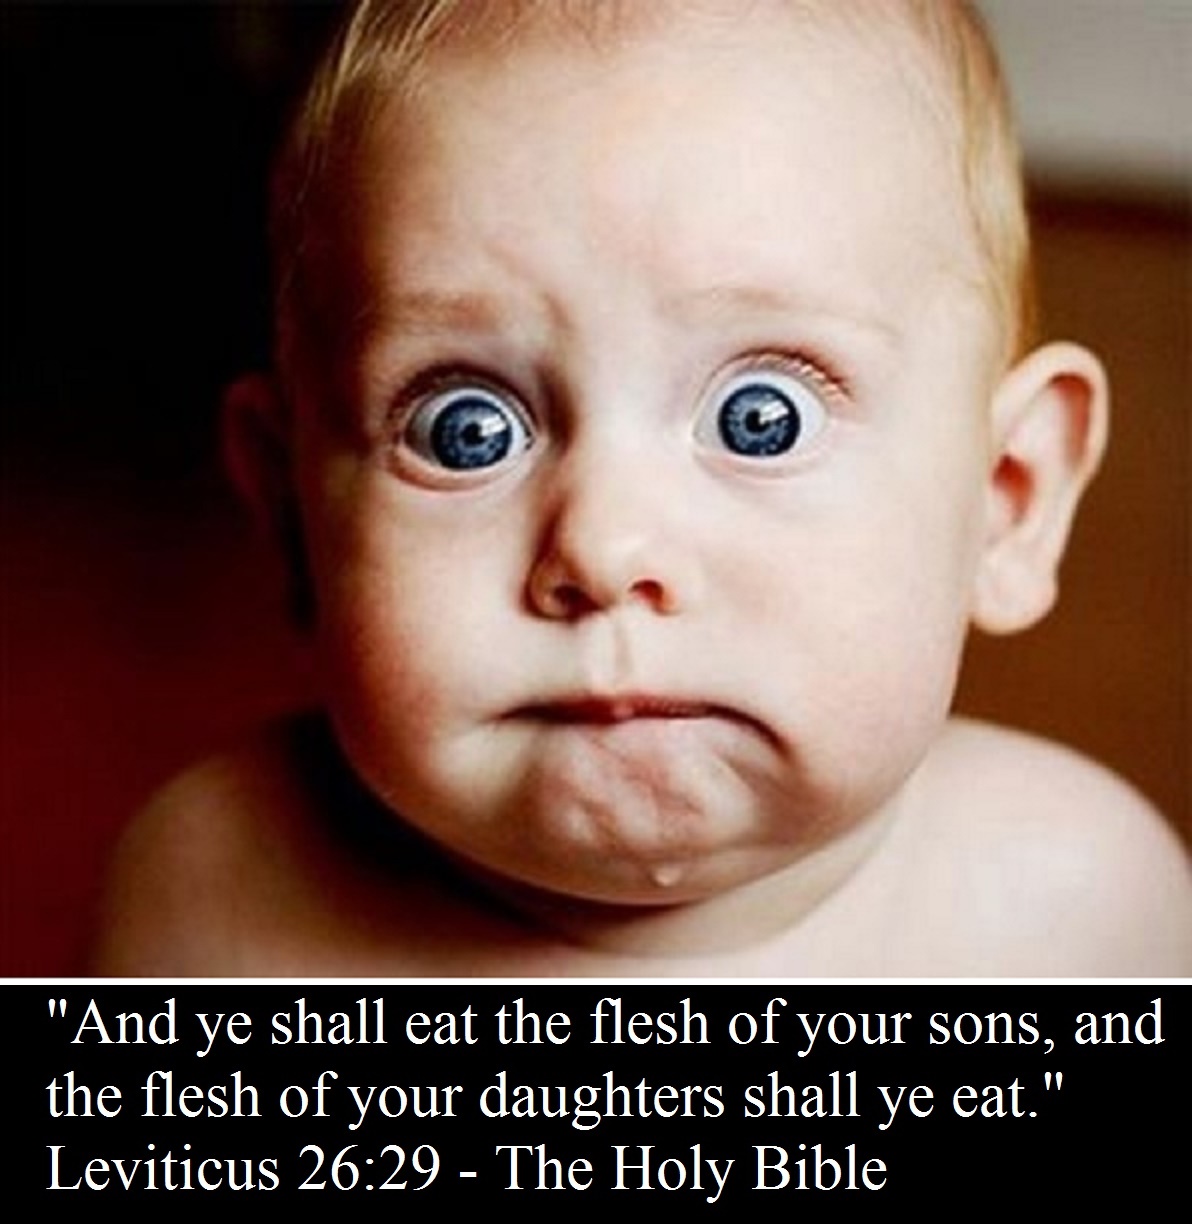 "And ye shall eat the flesh of your sons, and the flesh of your daughters shall ye eat." Leviticus 26:29 - The Holy Bible